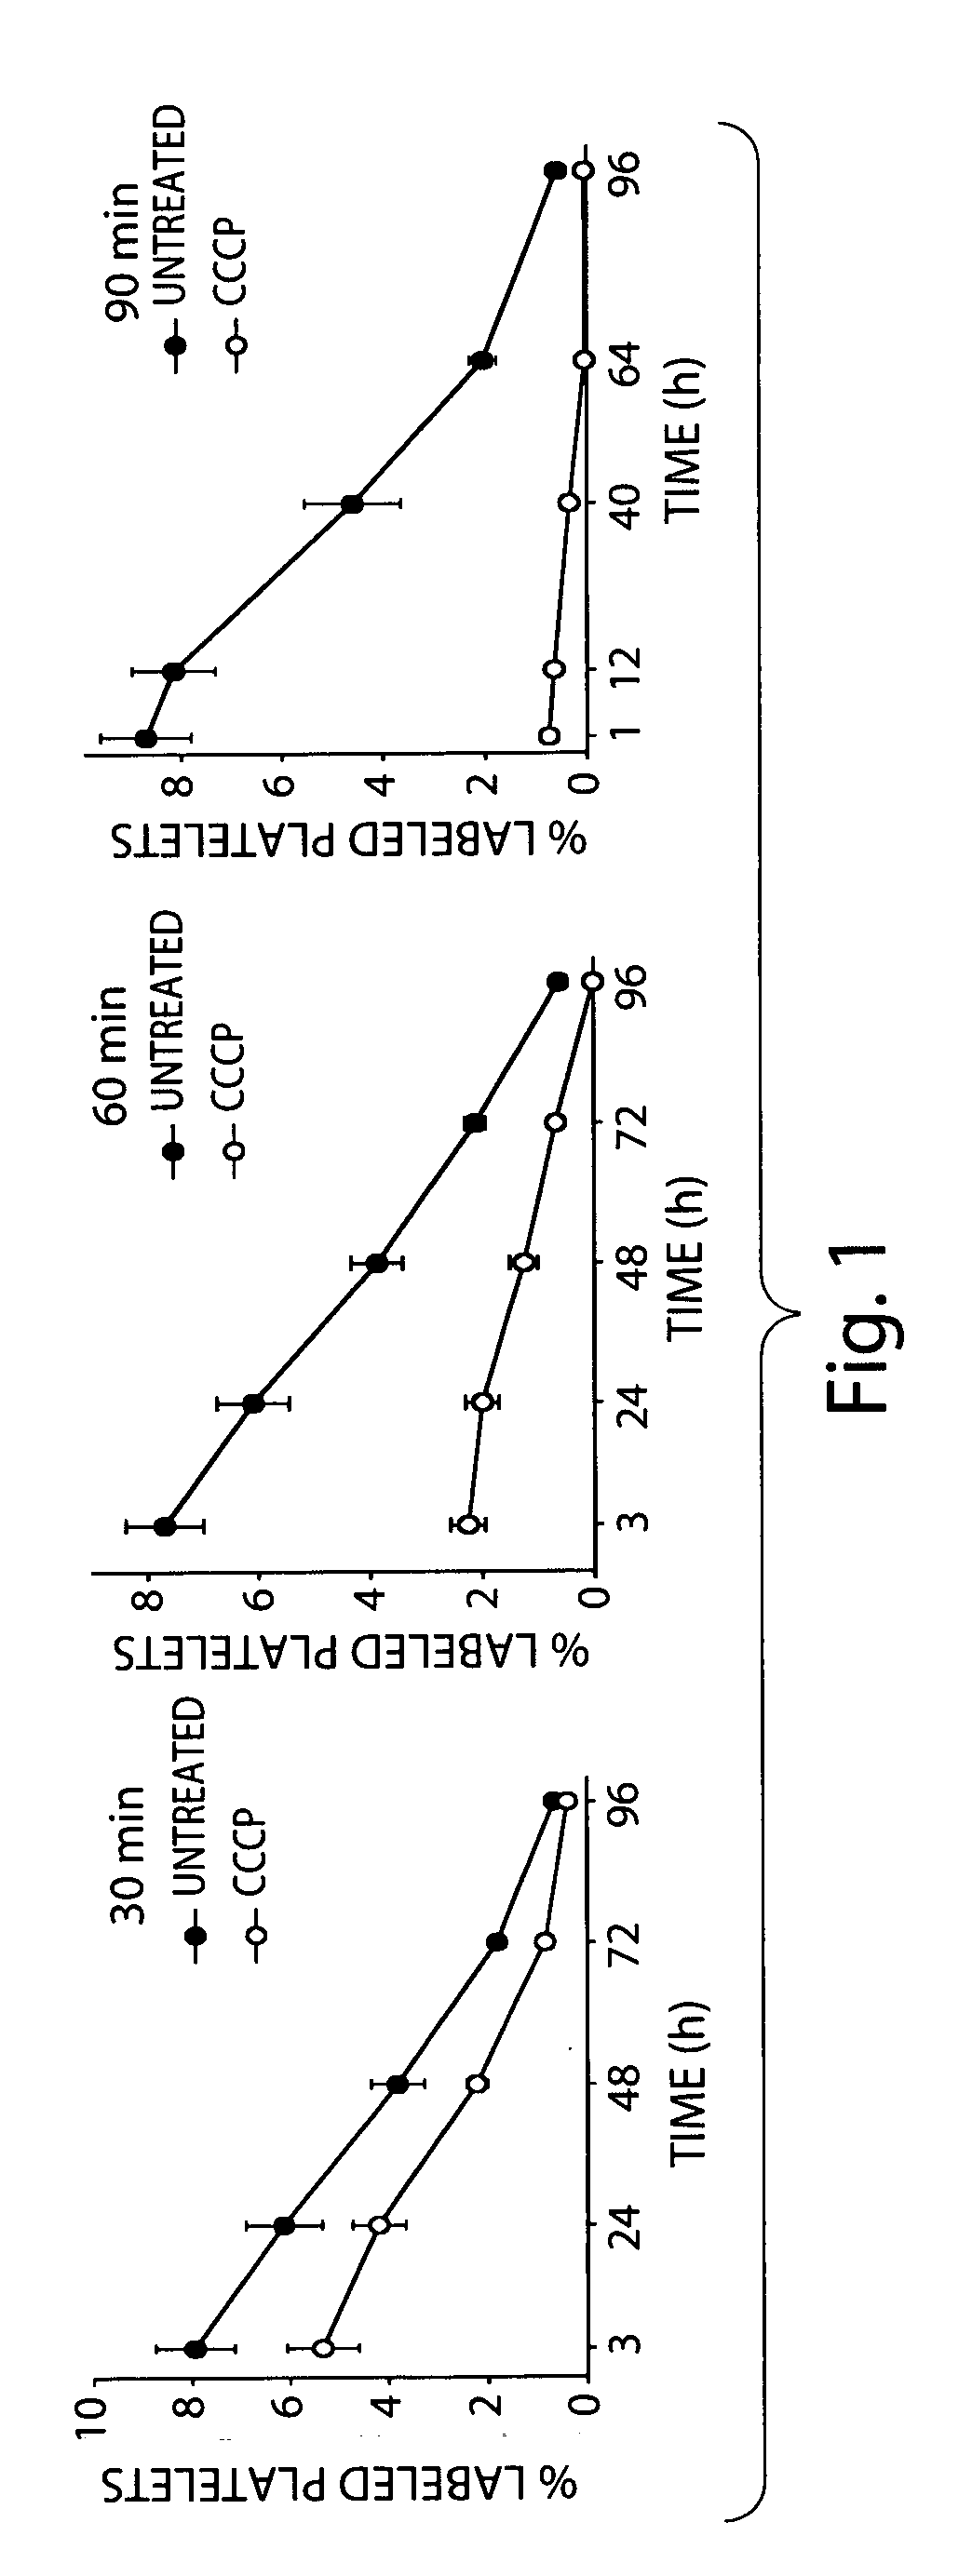 Compounds and methods for improving platelet recovery and function